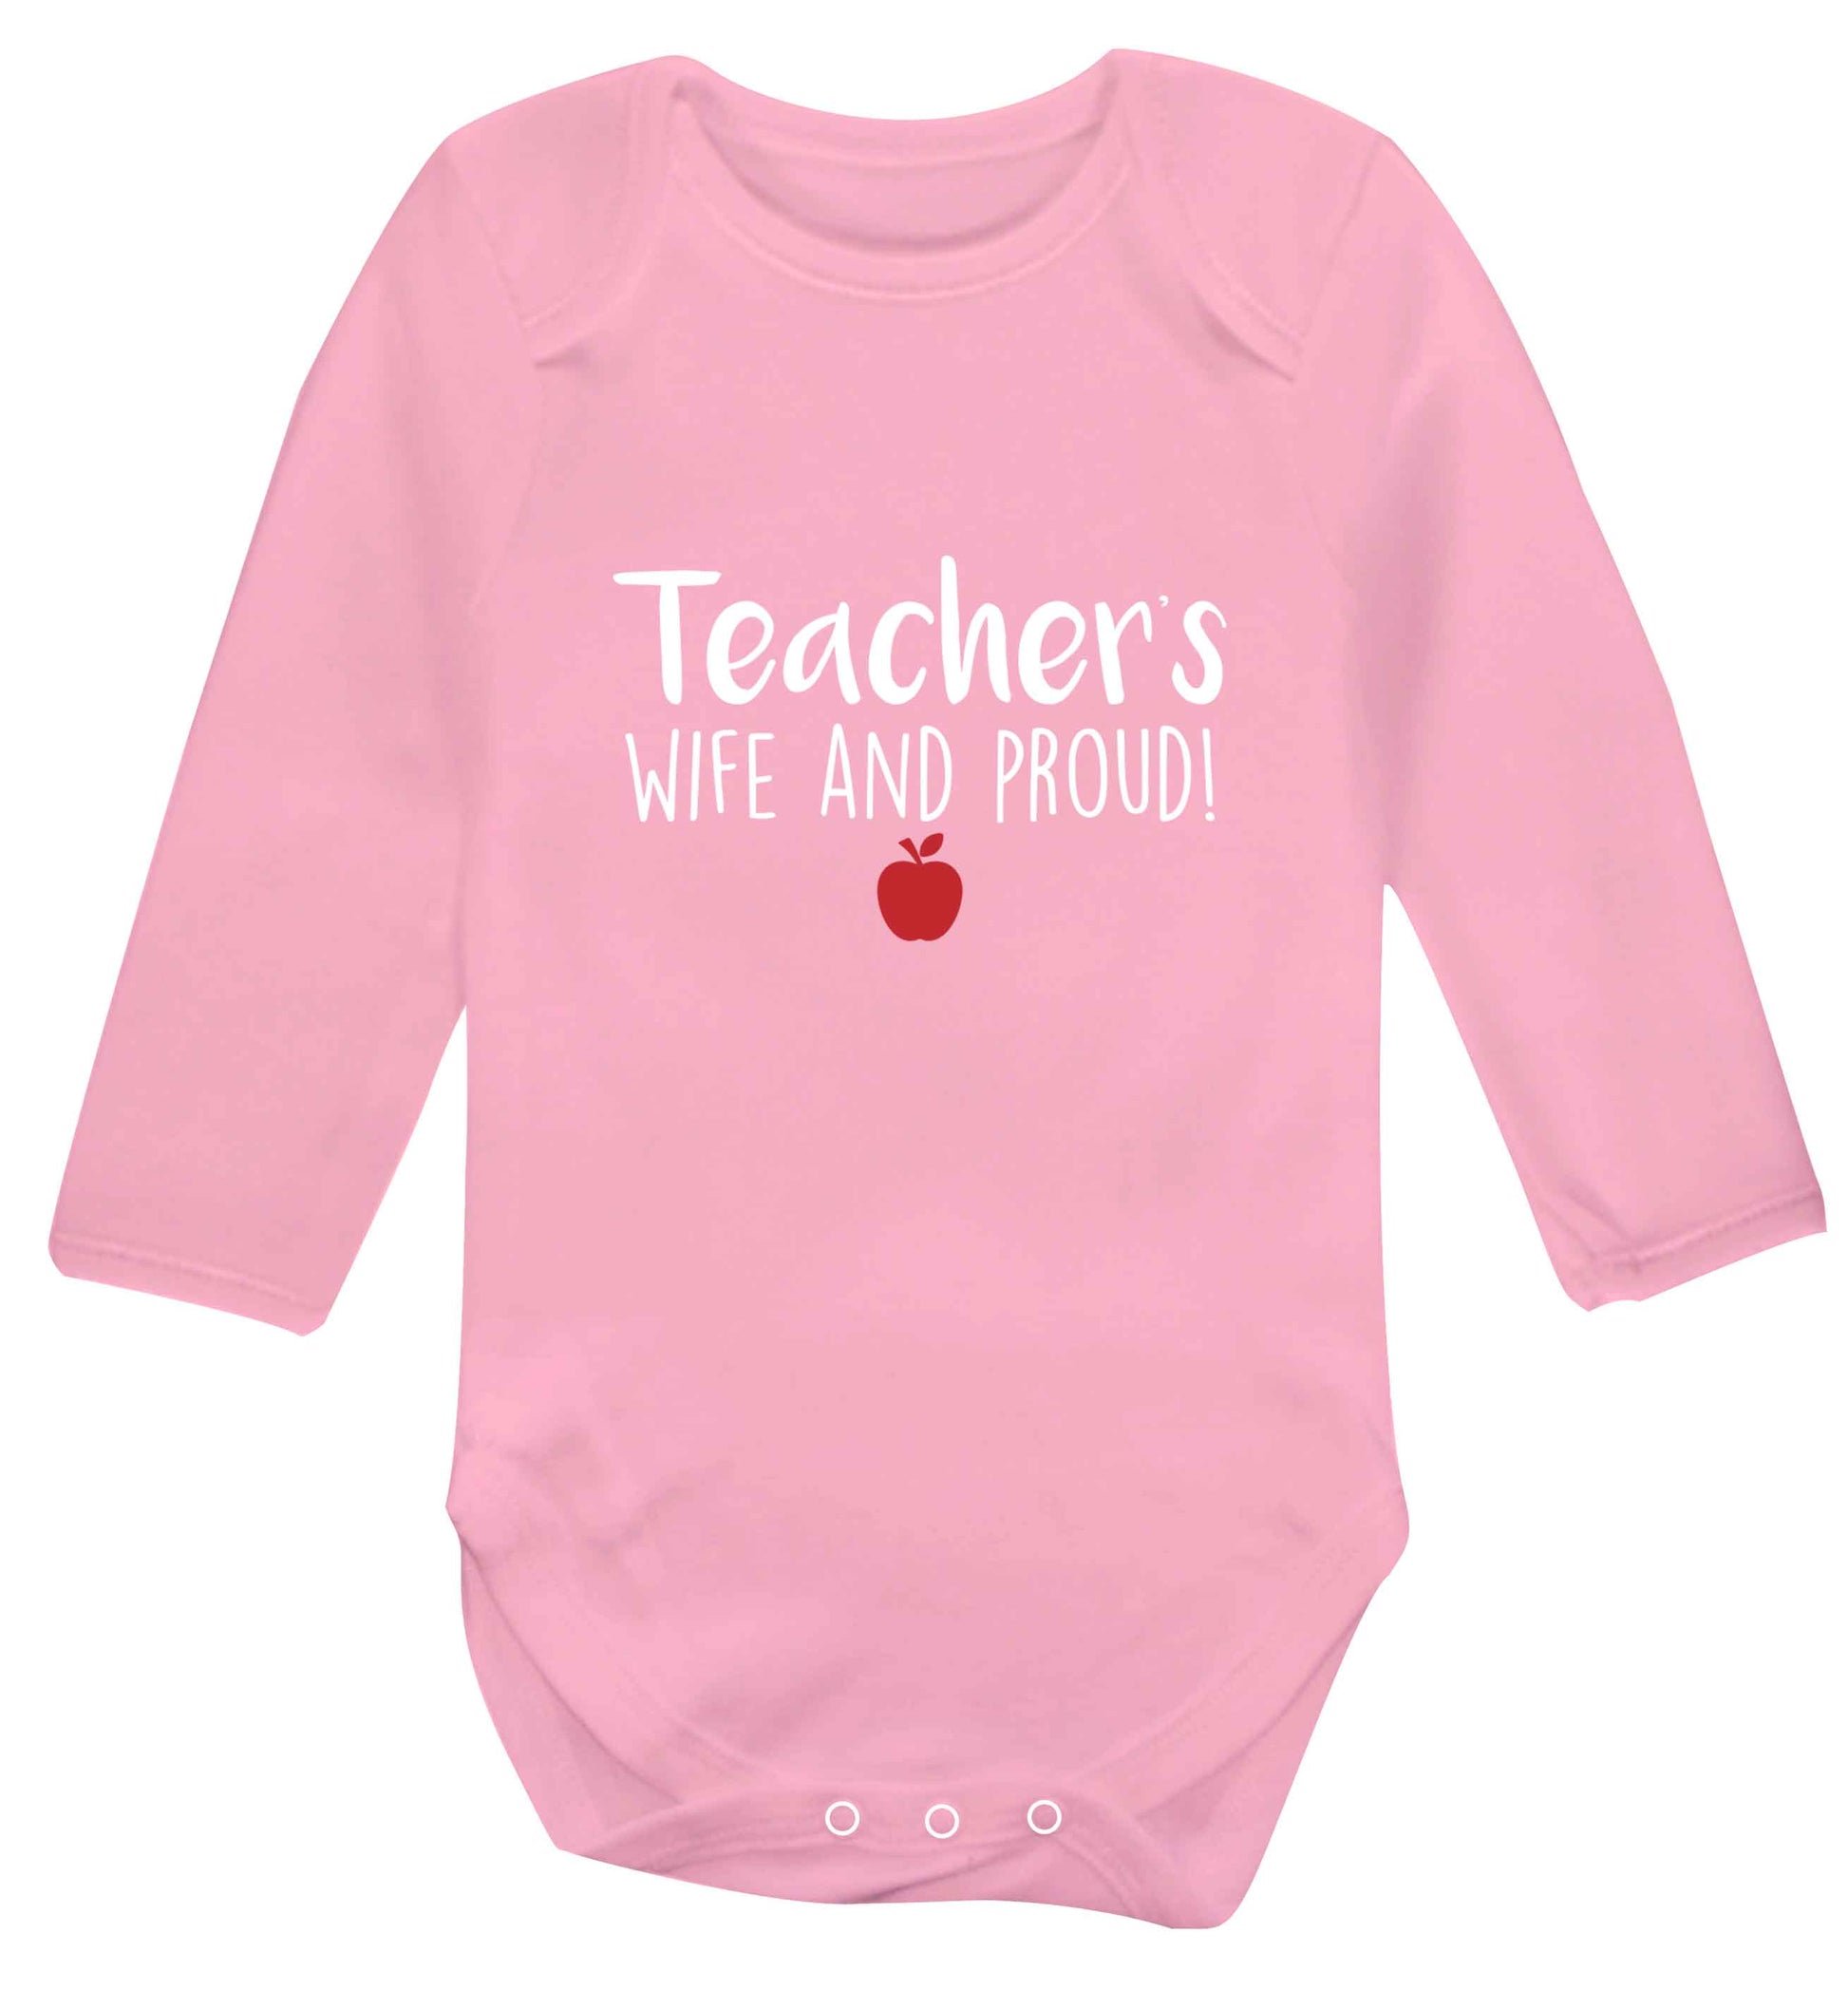 Teachers wife and proud baby vest long sleeved pale pink 6-12 months